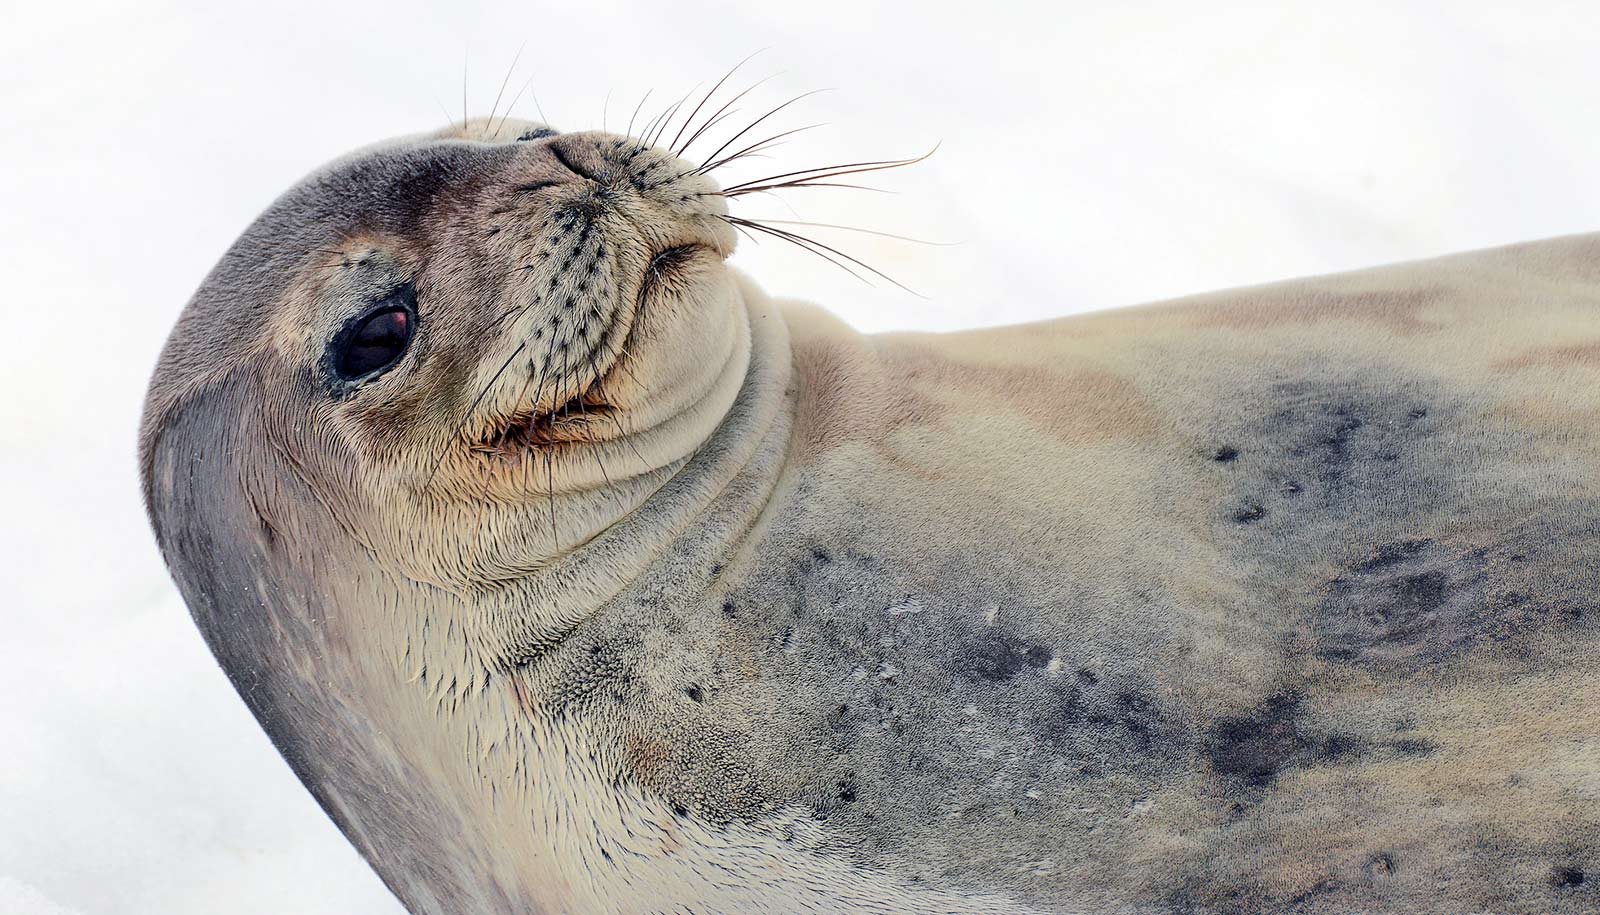 Seals chirp under the Antarctic ice, but we can’t hear them